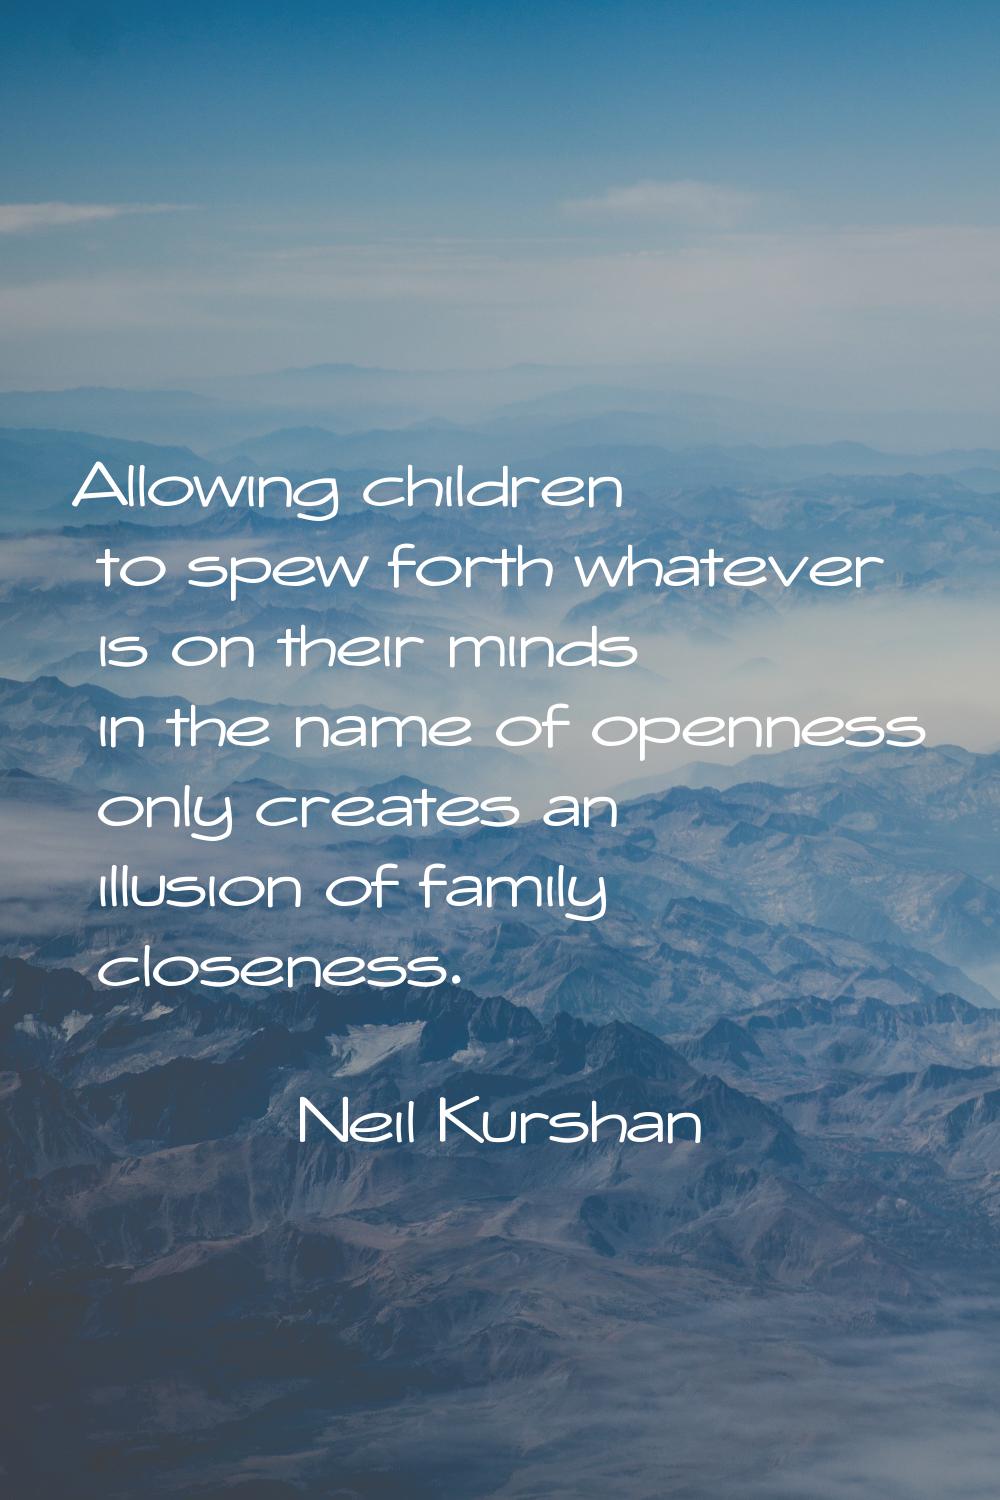 Allowing children to spew forth whatever is on their minds in the name of openness only creates an 